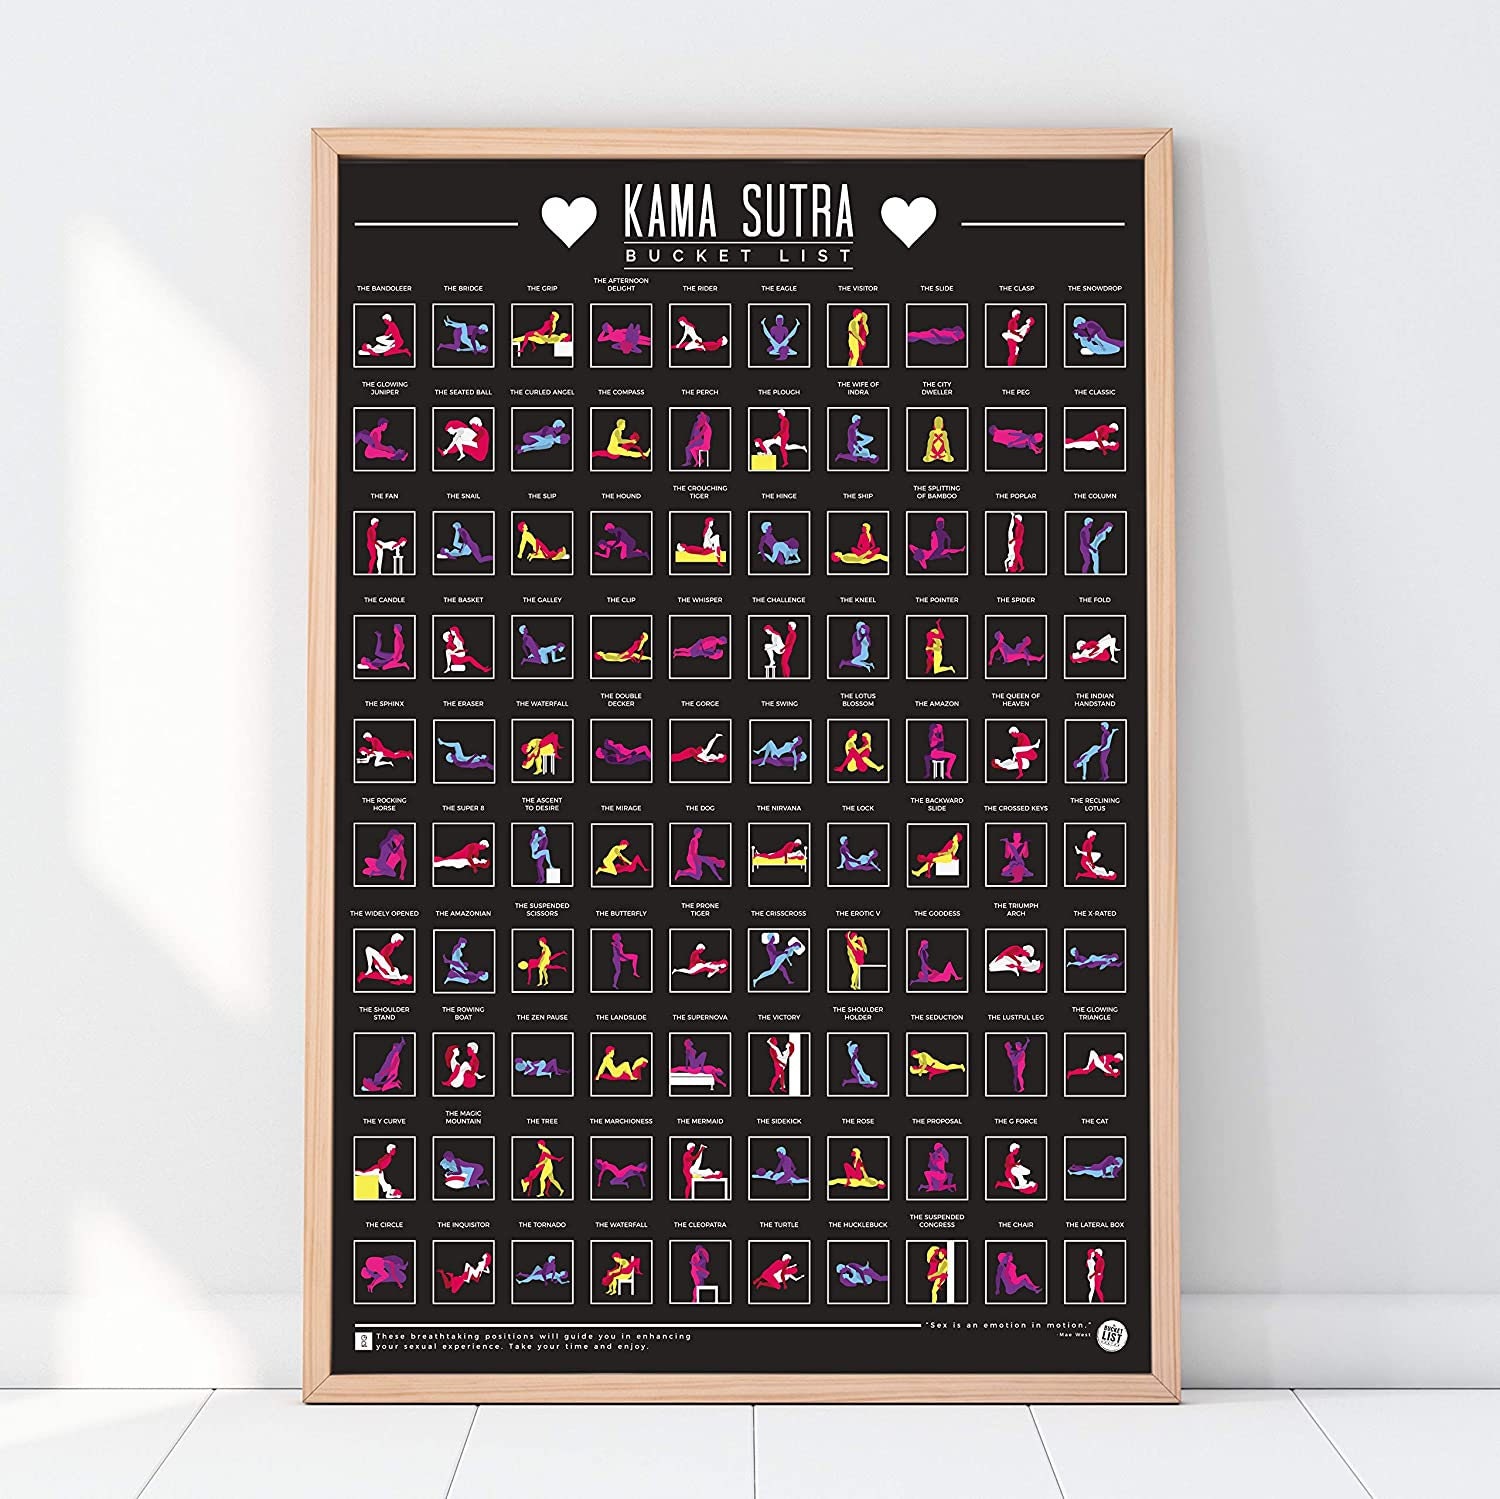 100 Kama Sutra Positions Scratch off Bucket List Poster